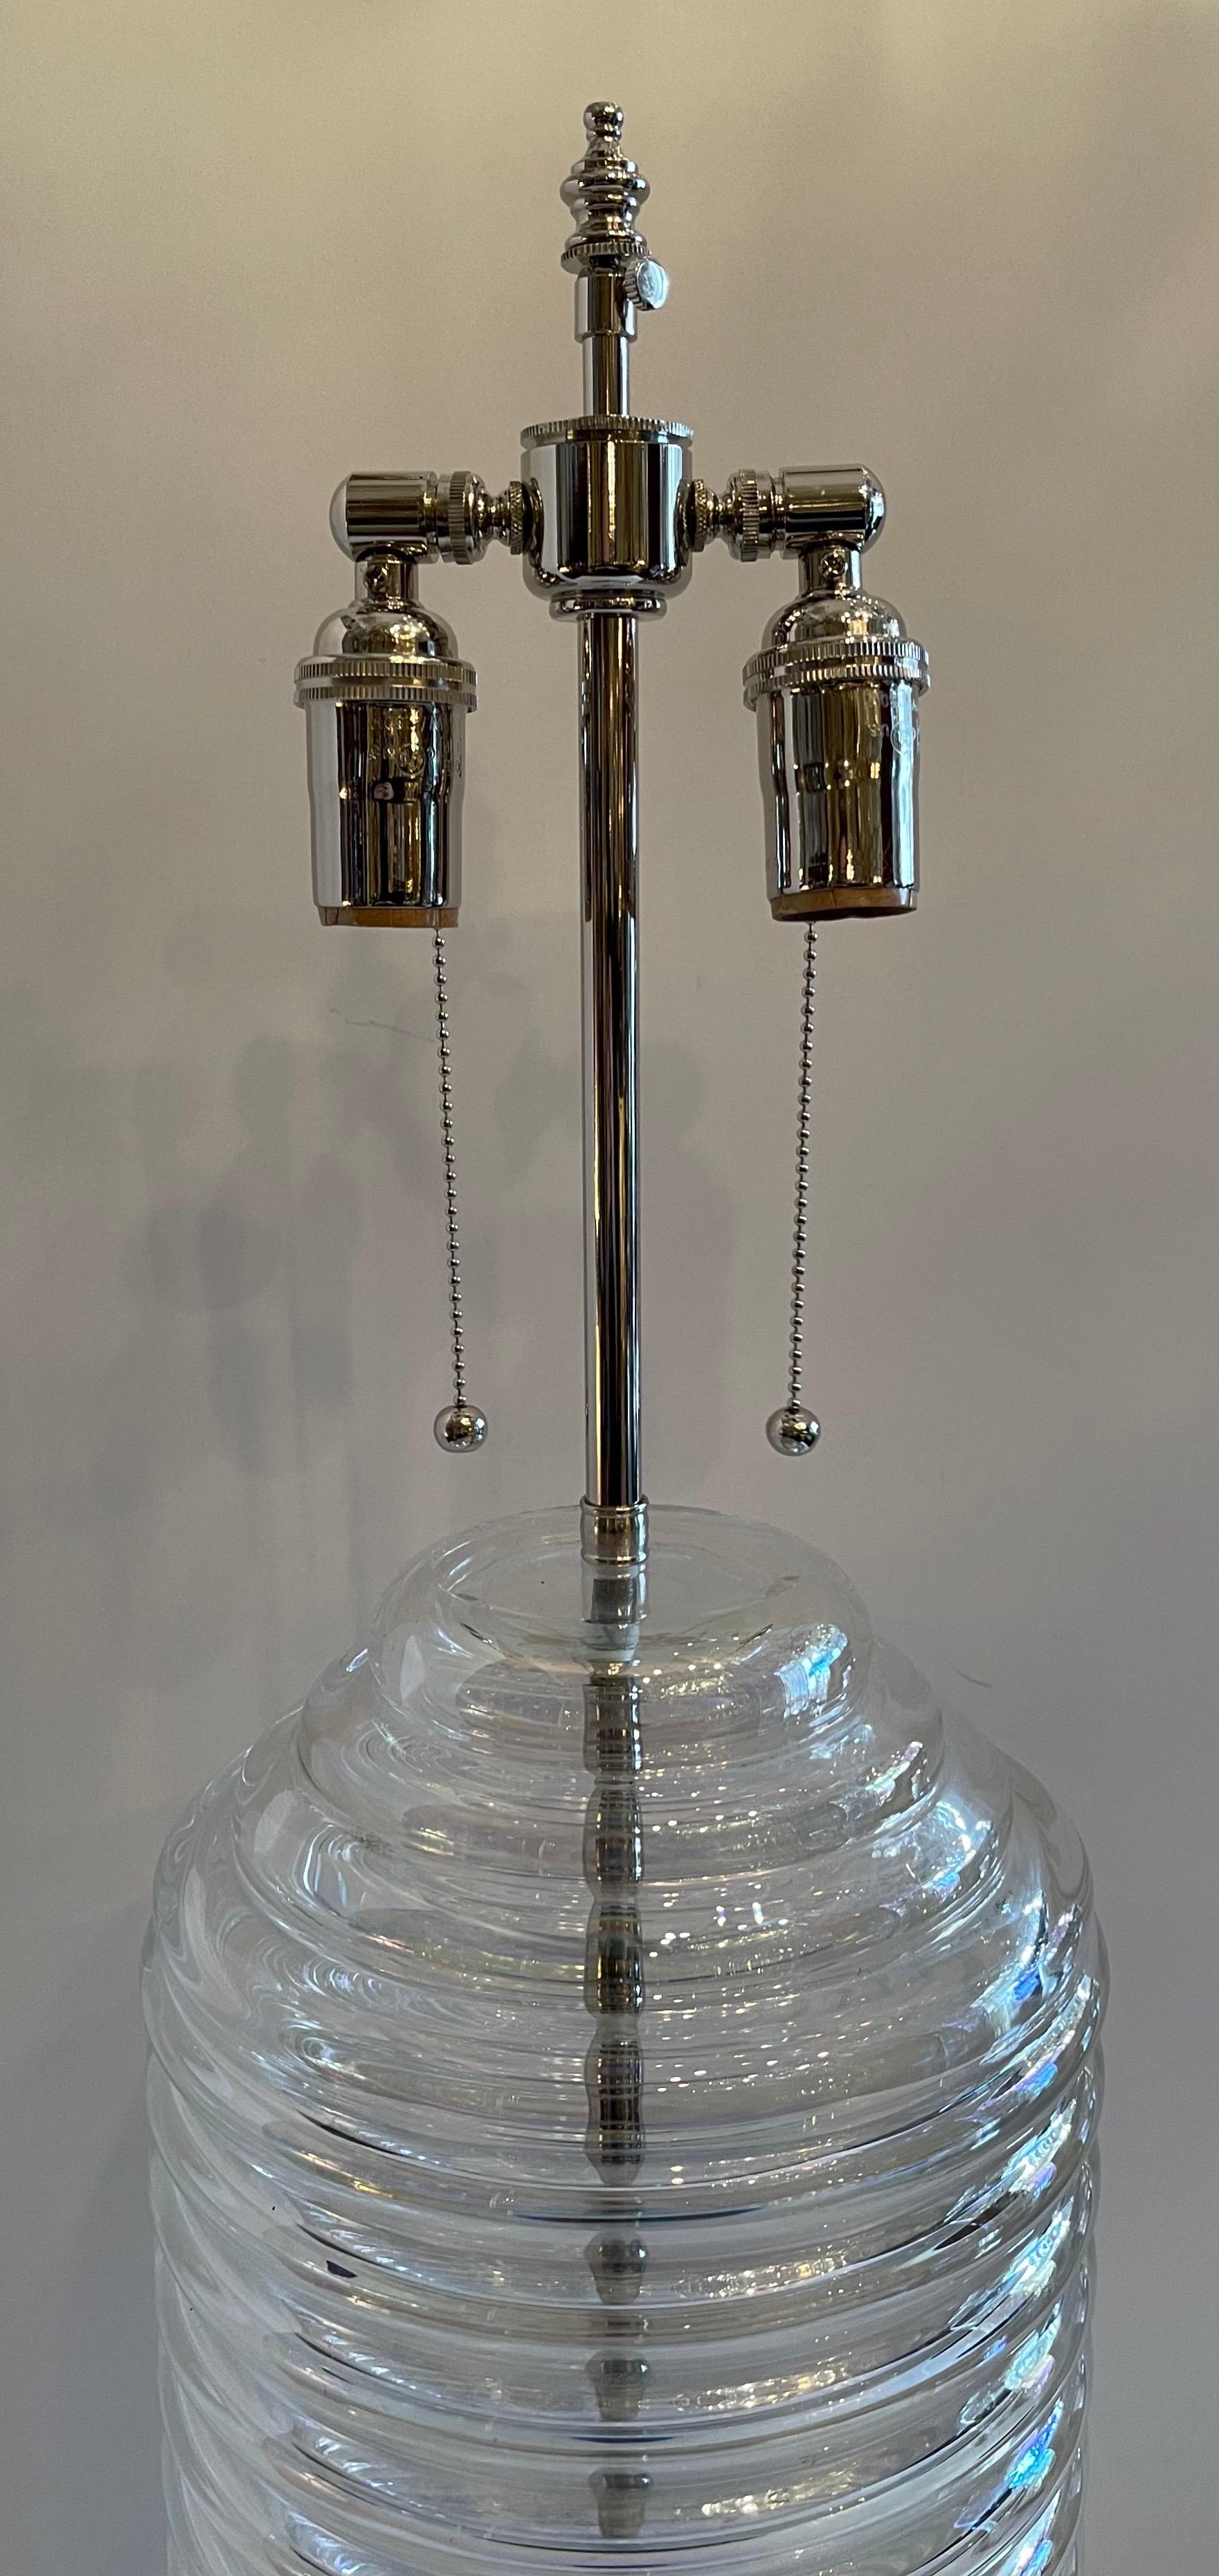 A wonderful Lorin Marsh NYC Murano Italy art glass beehive clear iridescent table lamp with custom Lucite base. Completely rewired with polished nickel sockets.